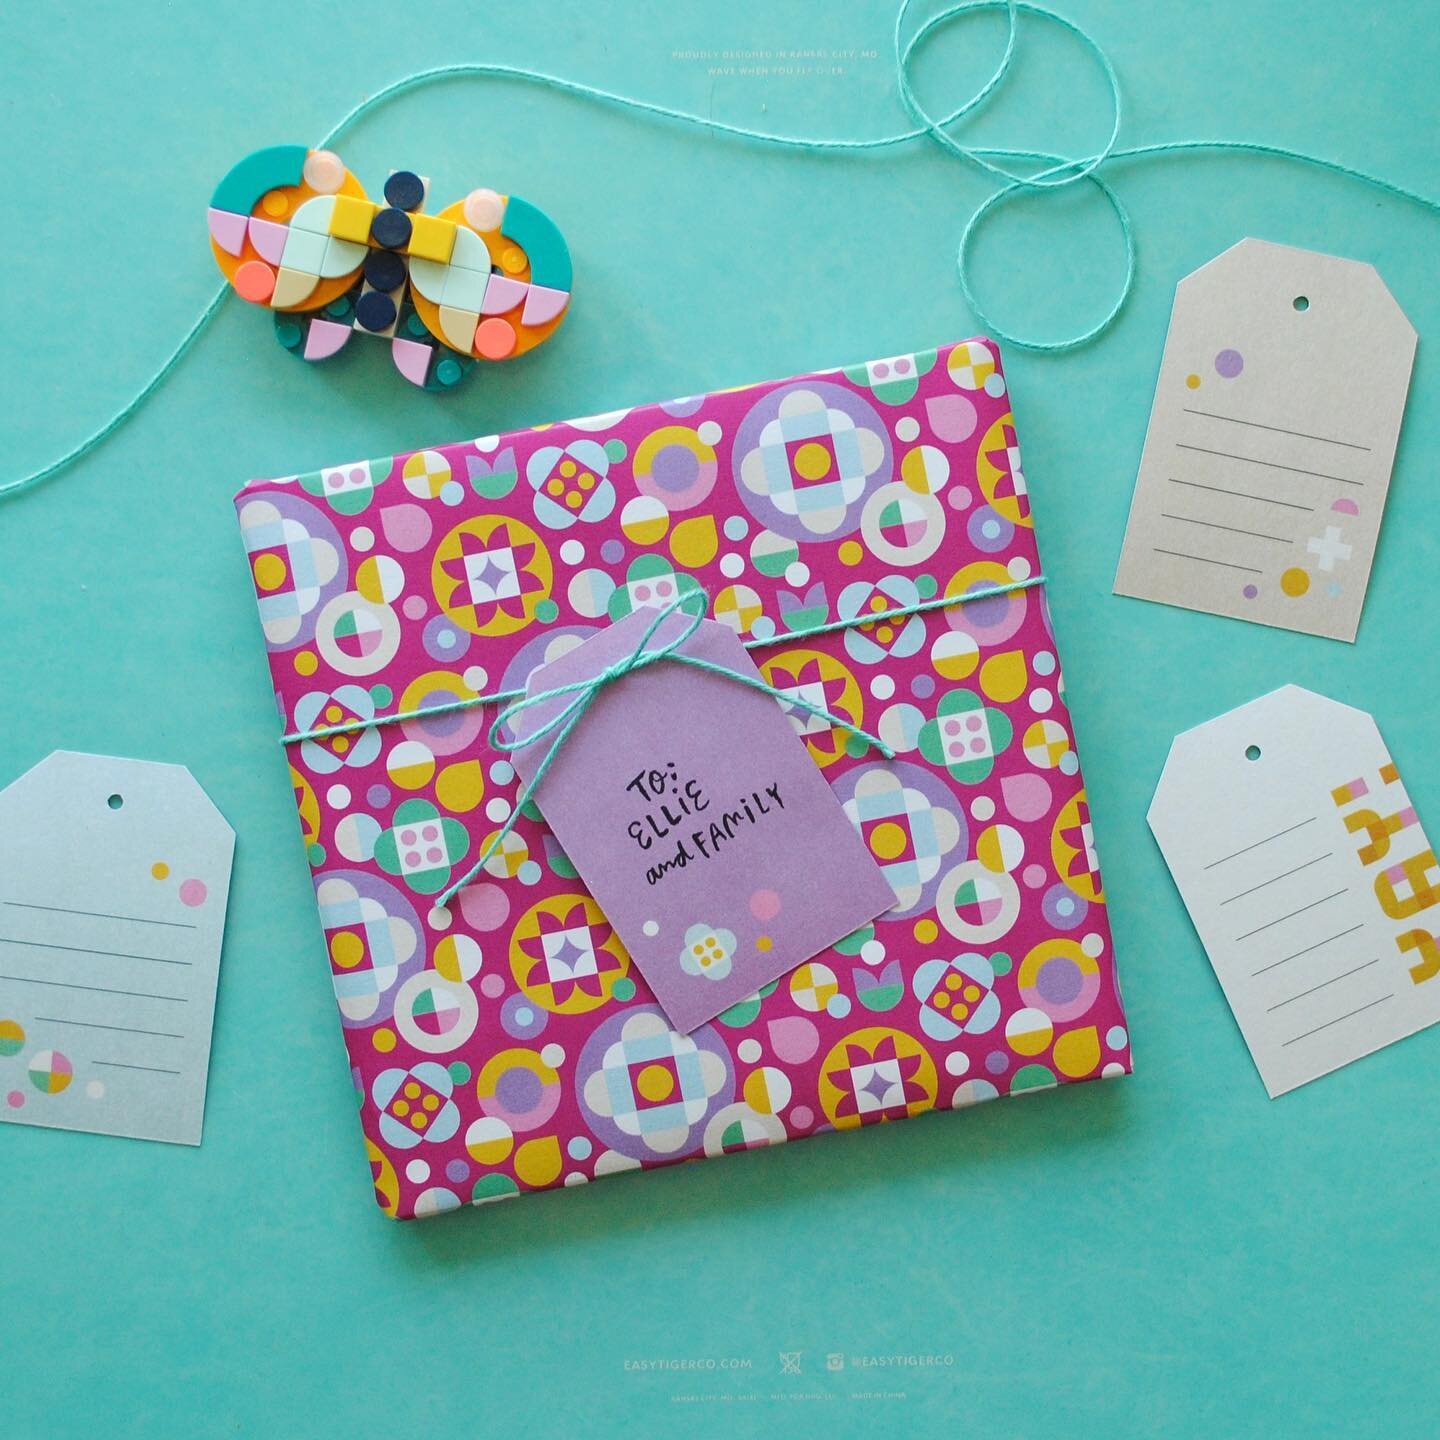 DOTTY MAY Wrapping &amp; Tags - After I made the photo album, I had all the patterns and design elements for wrapping paper and tags. If you spend all that time designing a photo album, you might as well make matching gift wrap too, right?!

I call m